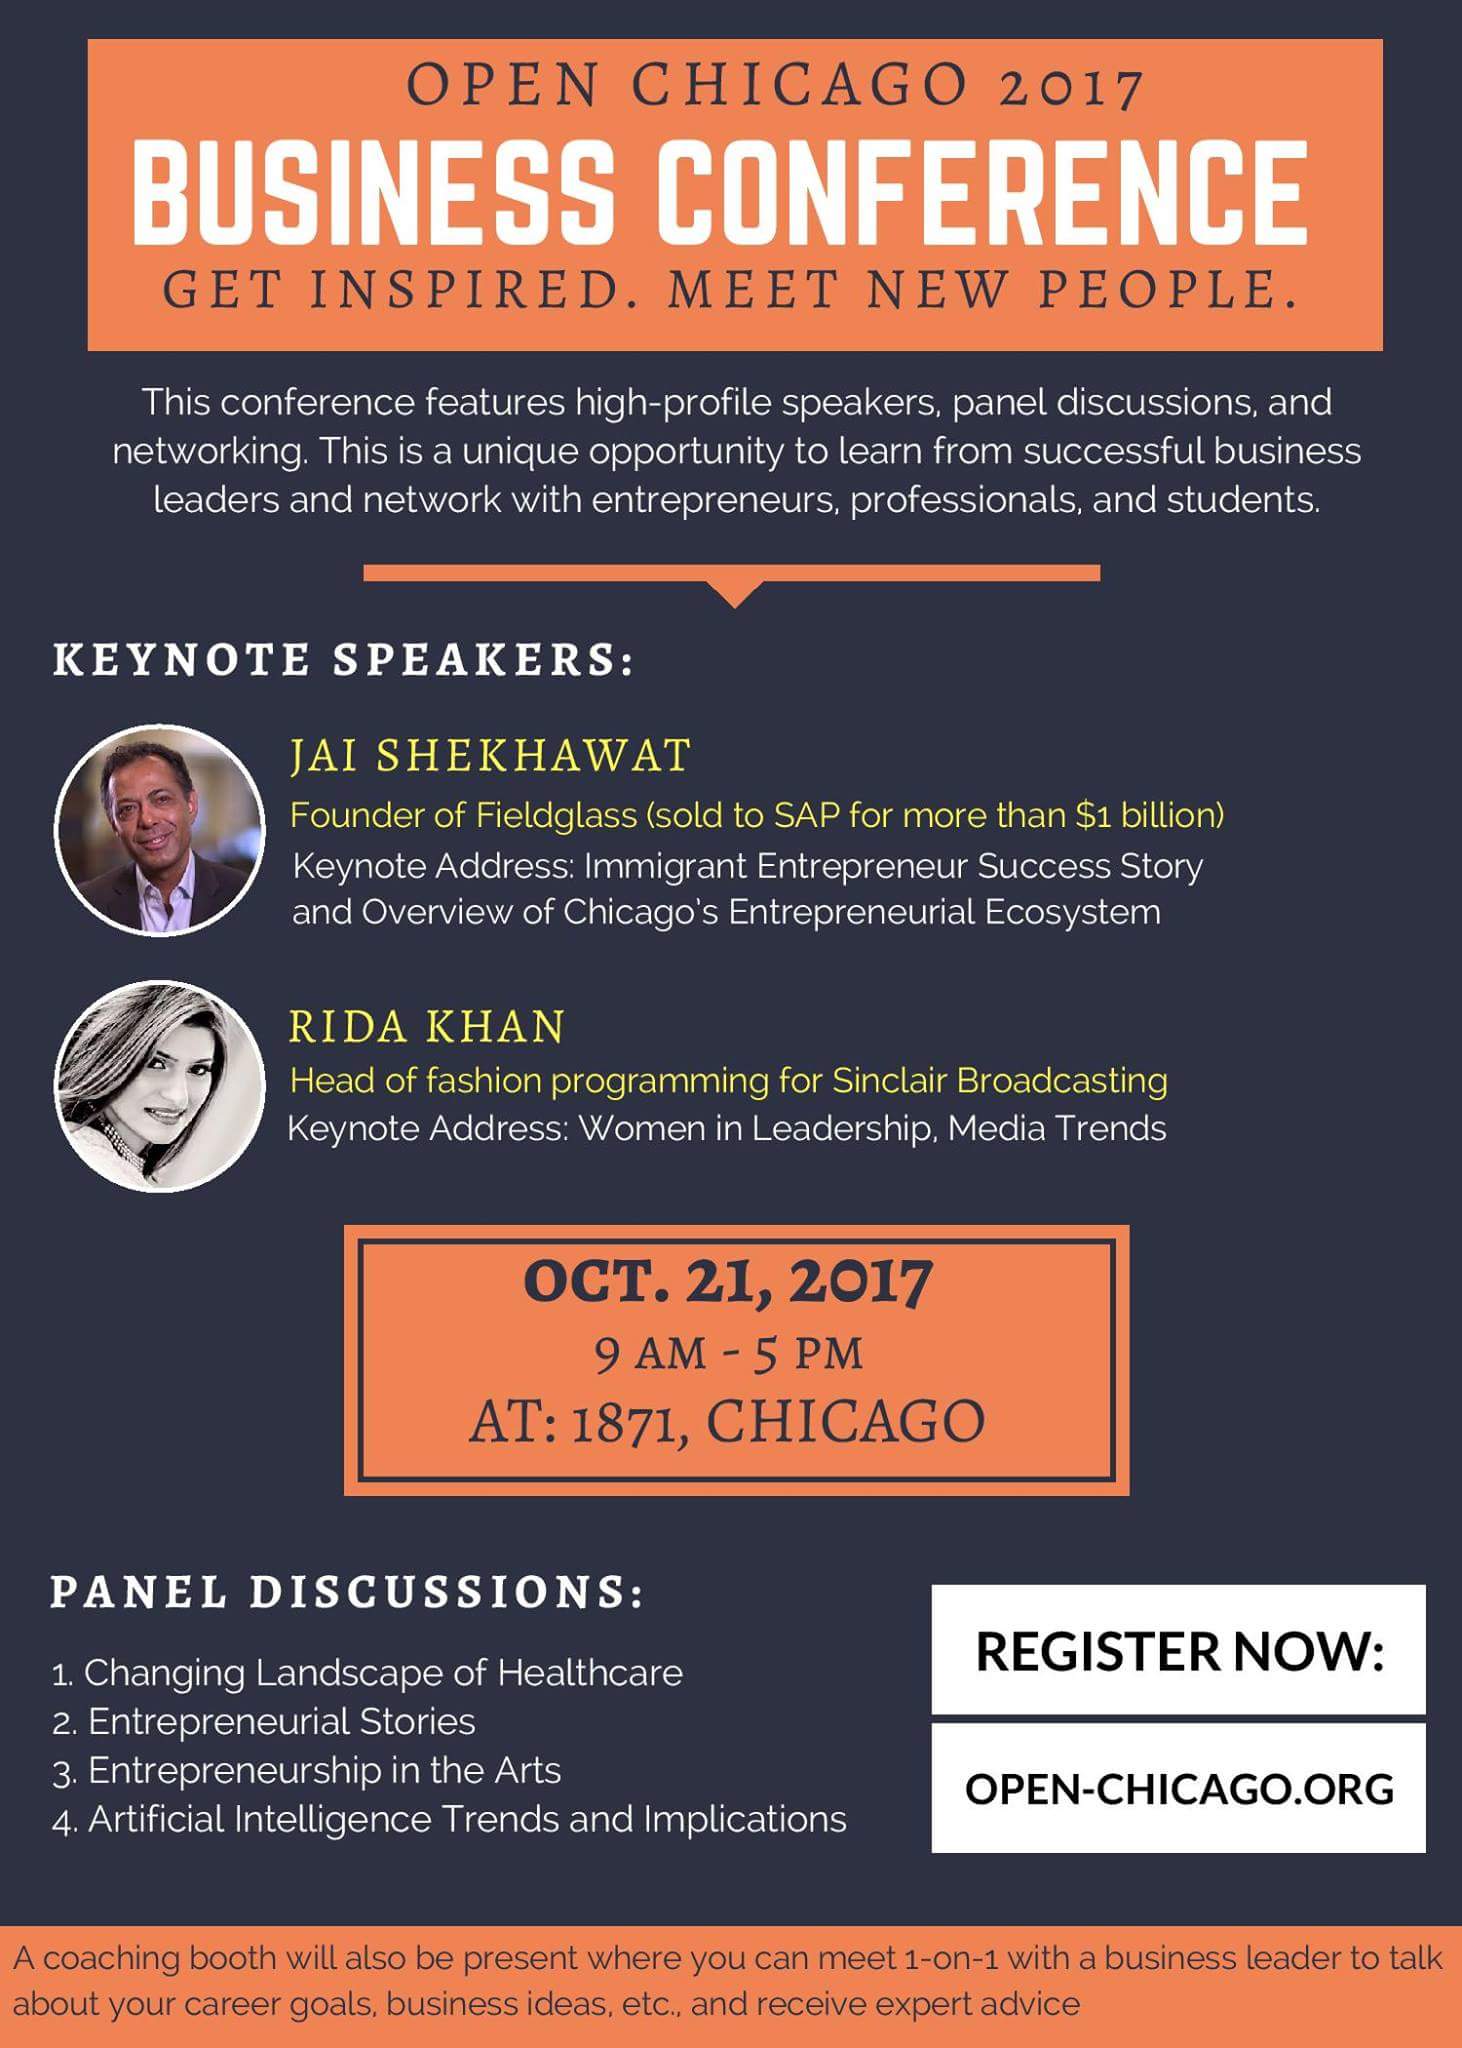 OPEN Chicago Annual Business Conference